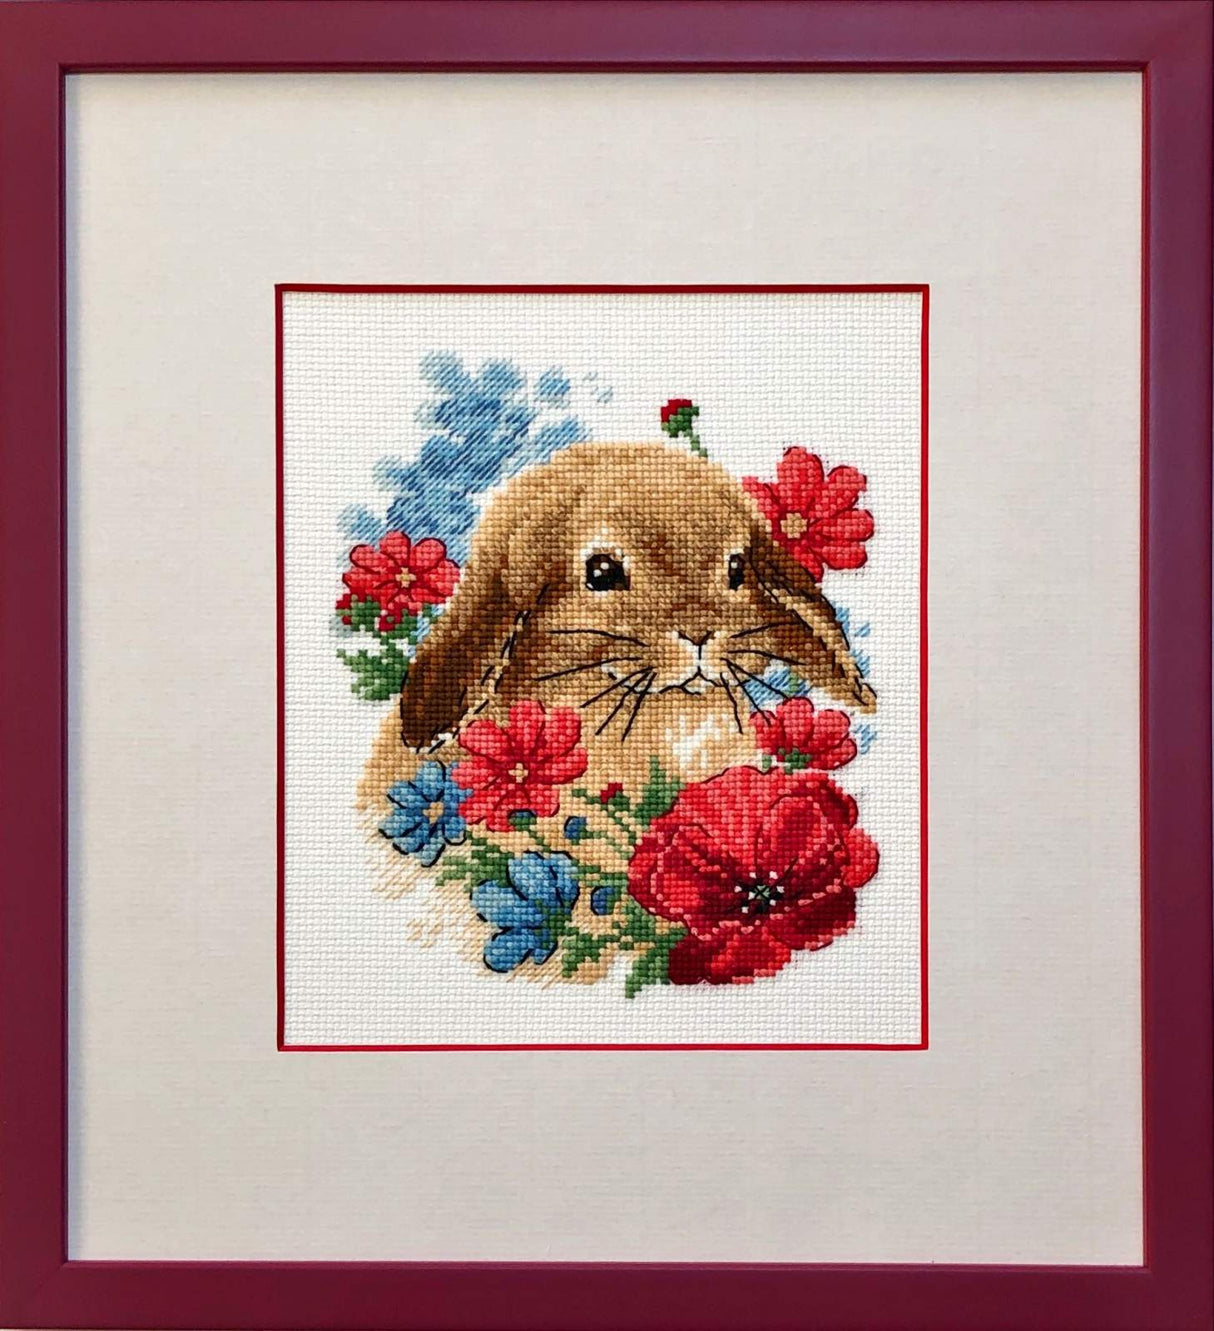 Cross Stitch Embroidery Kit - "Bunny in Flowers" - Riolis 1986